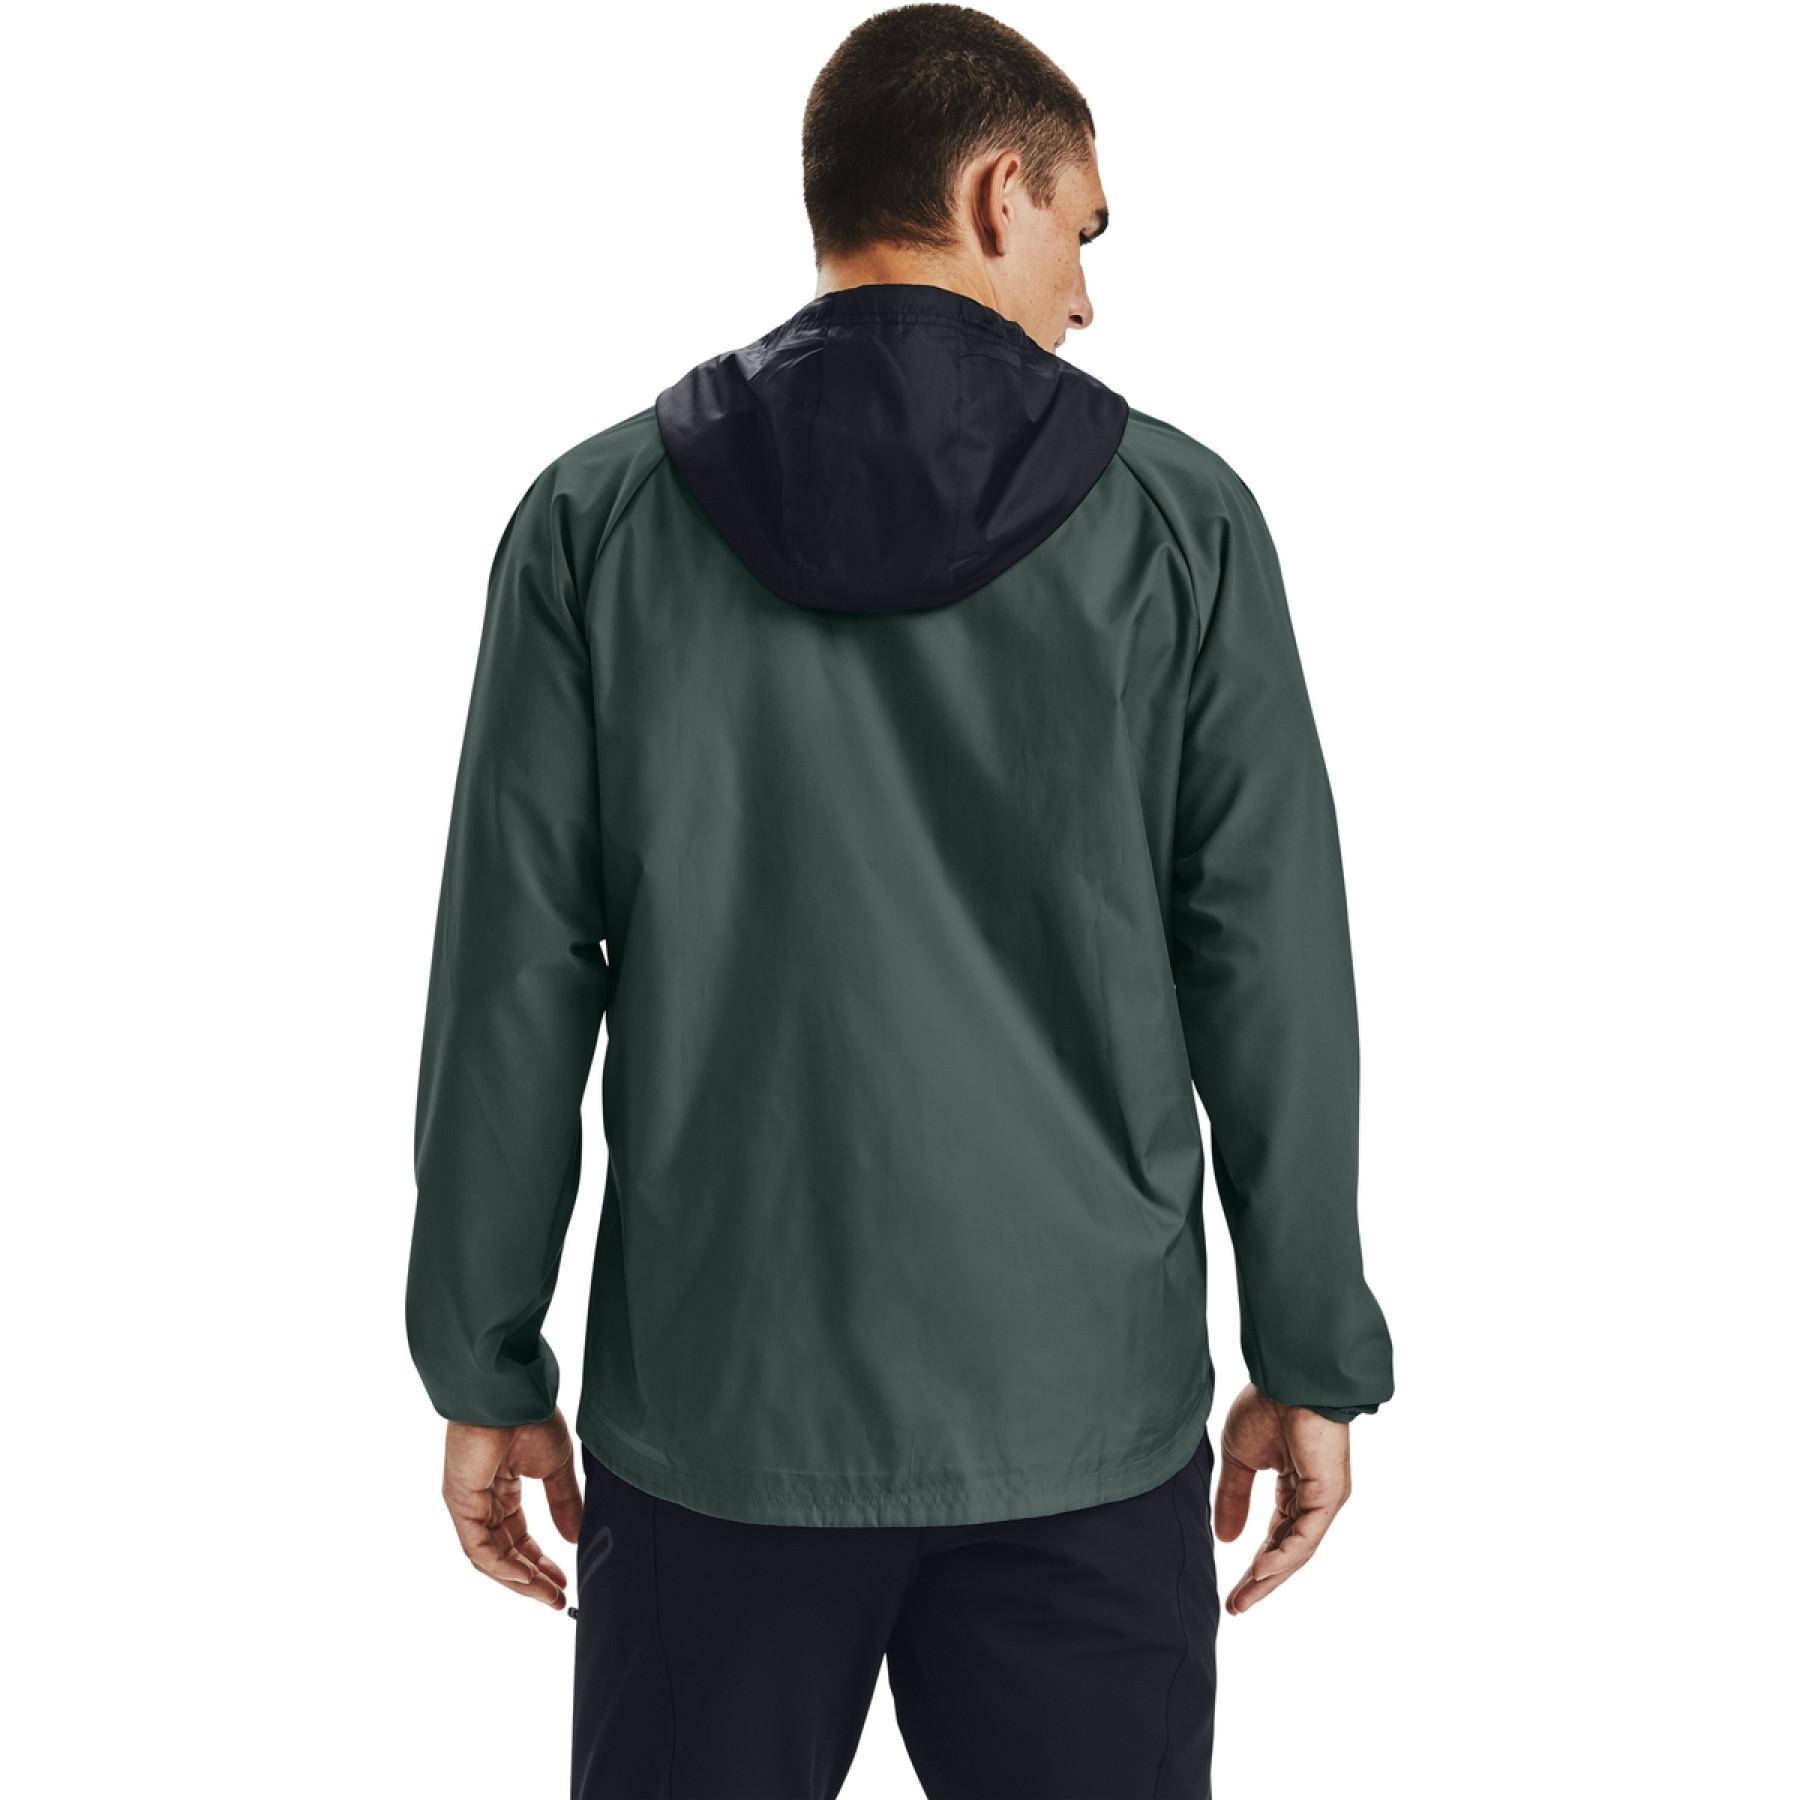 Jacke Under Armour Stretch Woven Full Zip